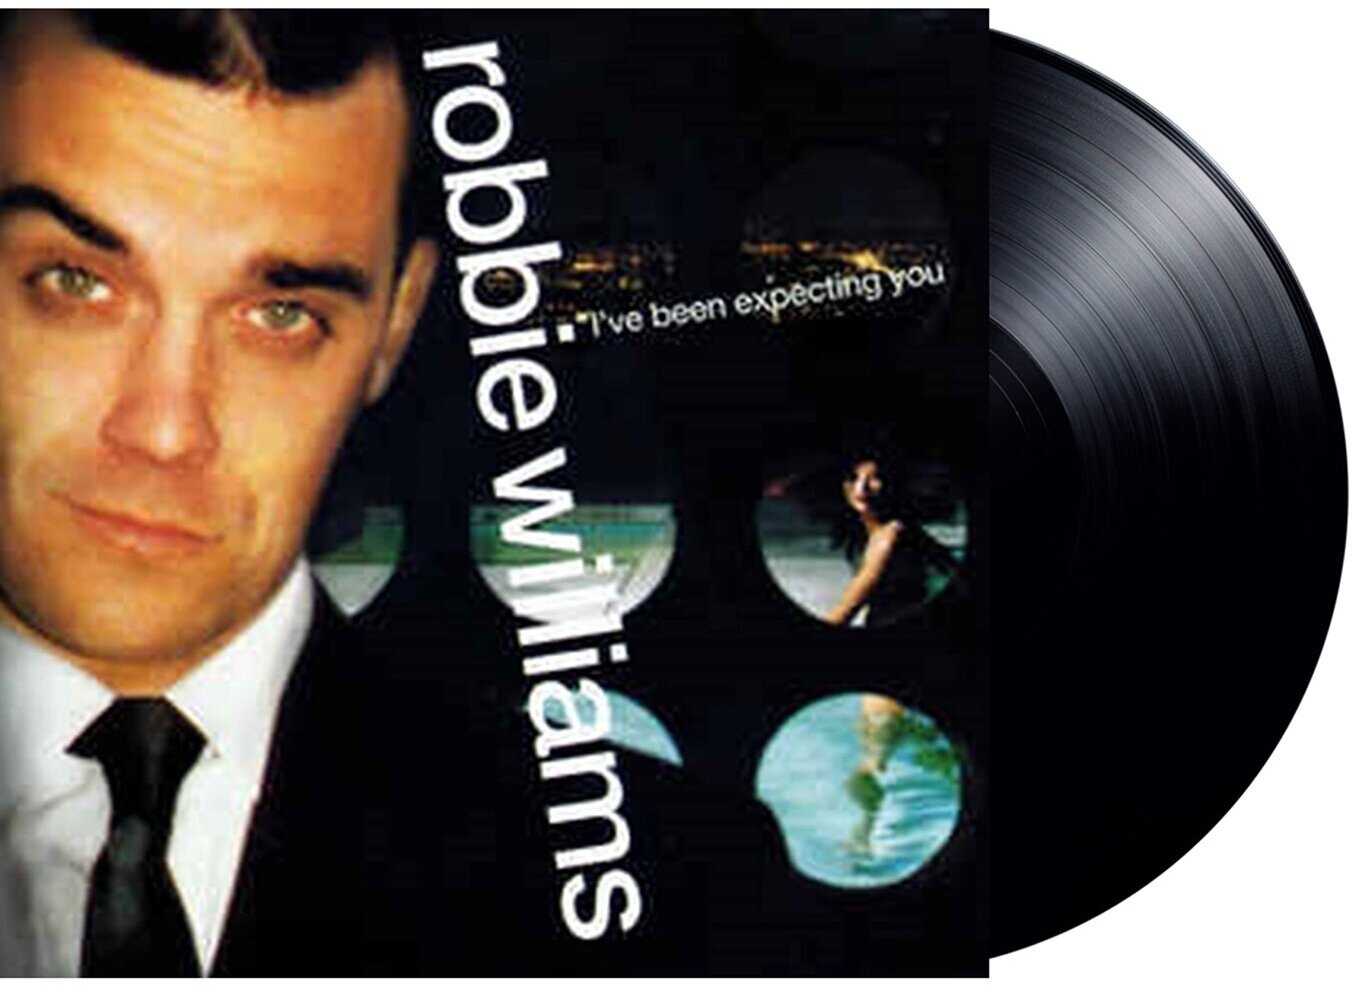 Robbie Williams Robbie Williams - I've Been Expecting You Island Records Group - фото №1